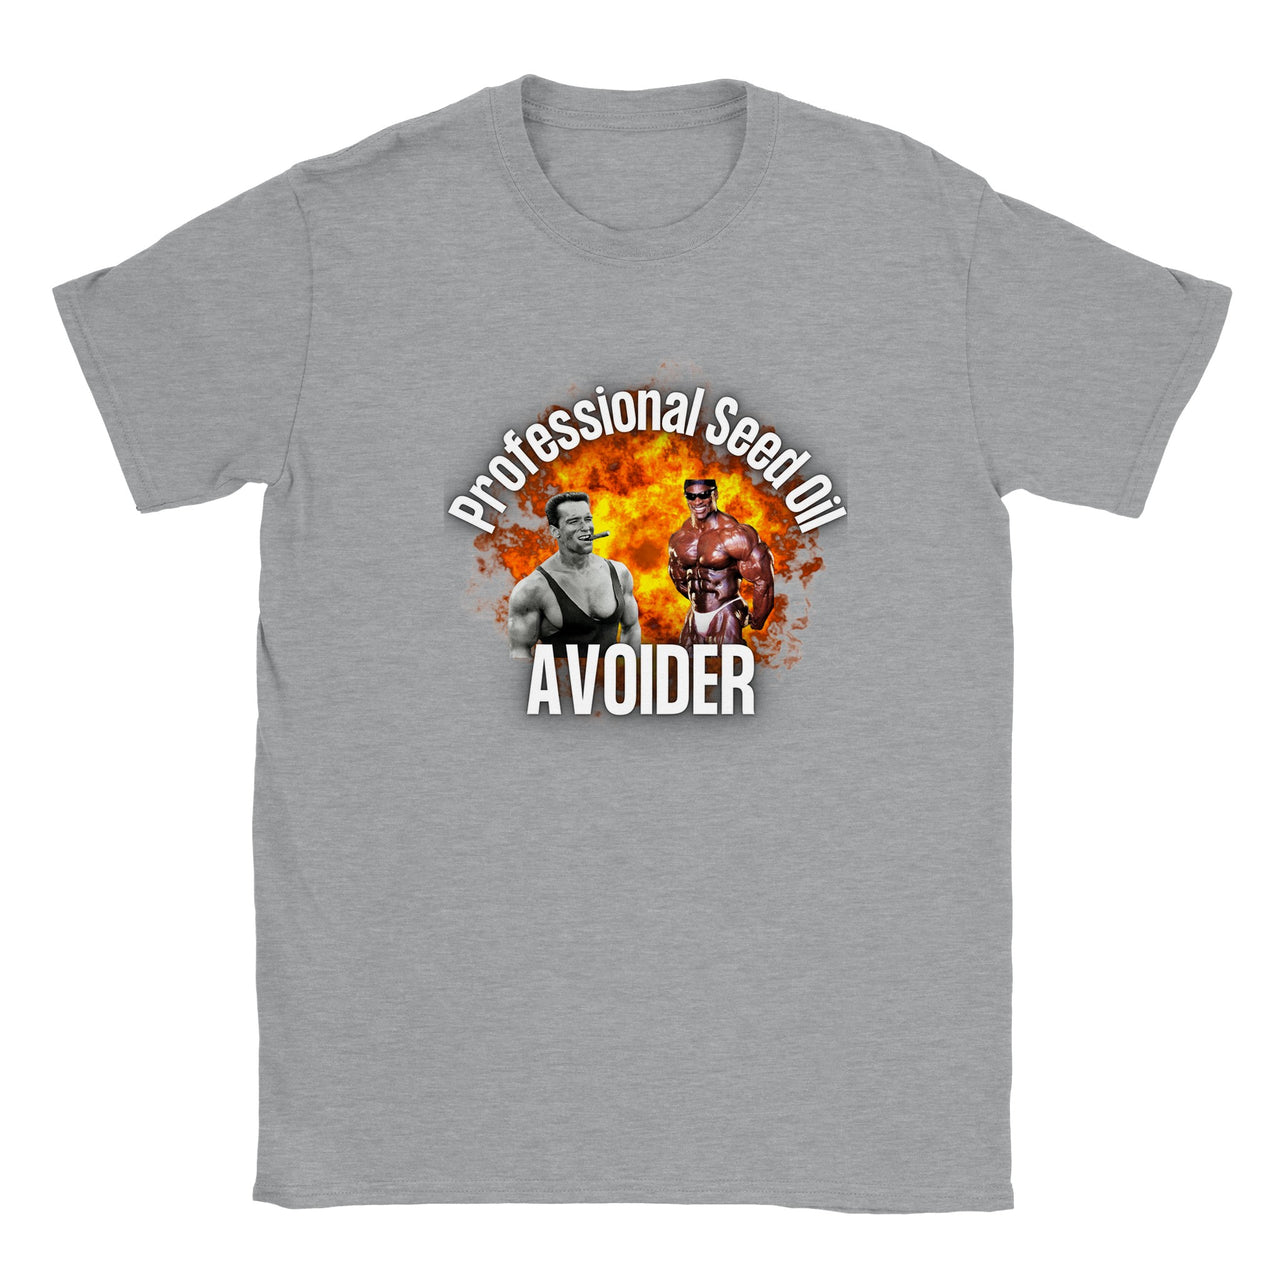 Professional Seed Oil Avoider T-shirt